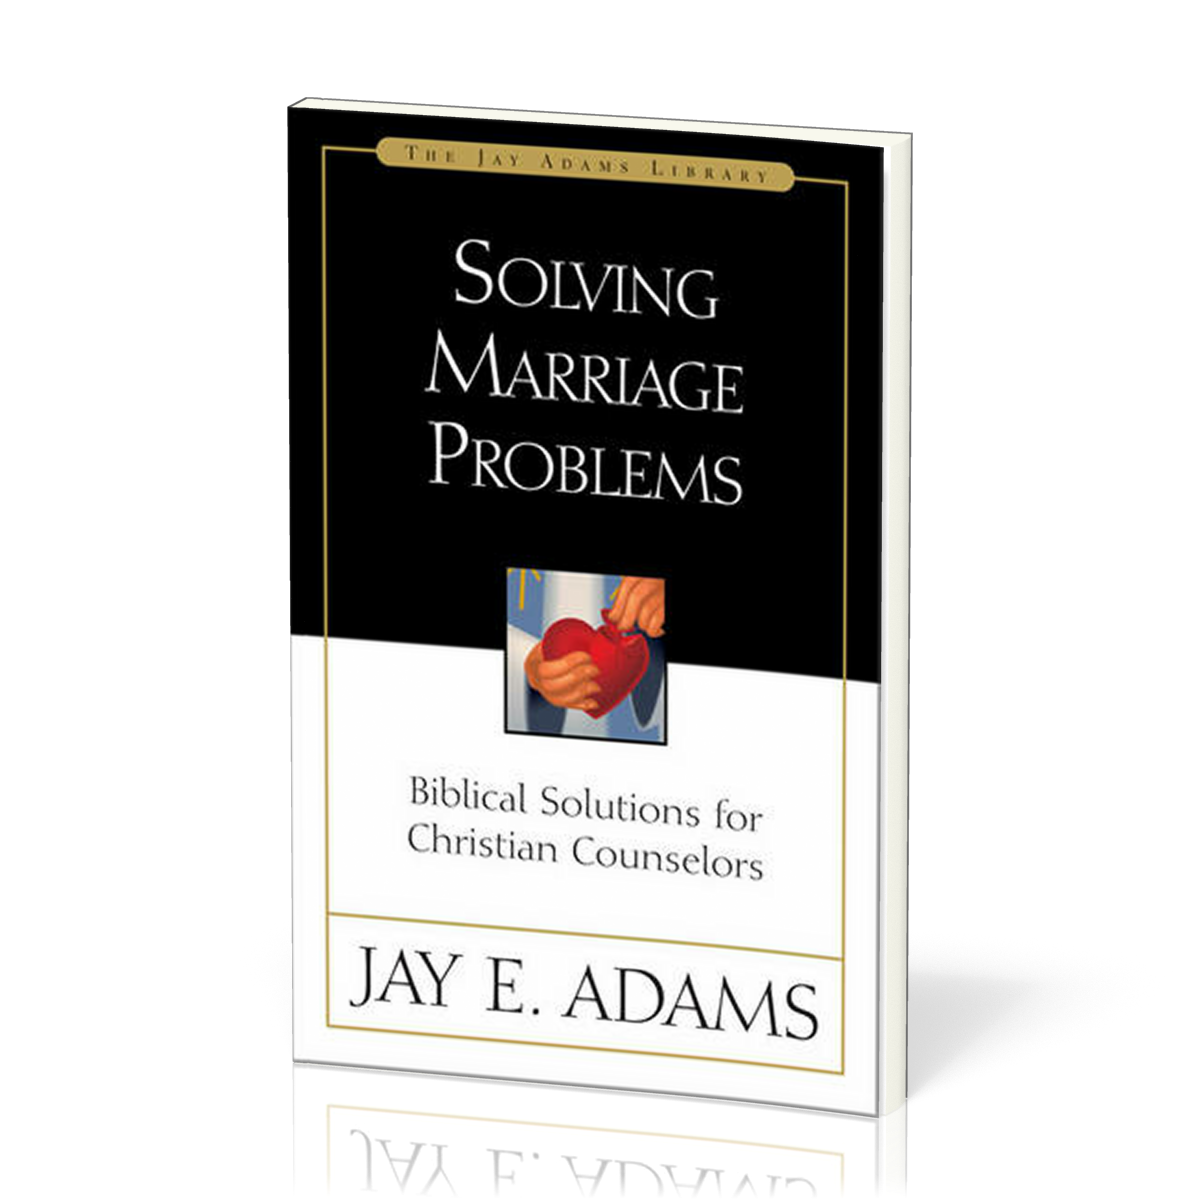 Solving Marriage Problems - Biblical Solutions for Christian Counselors